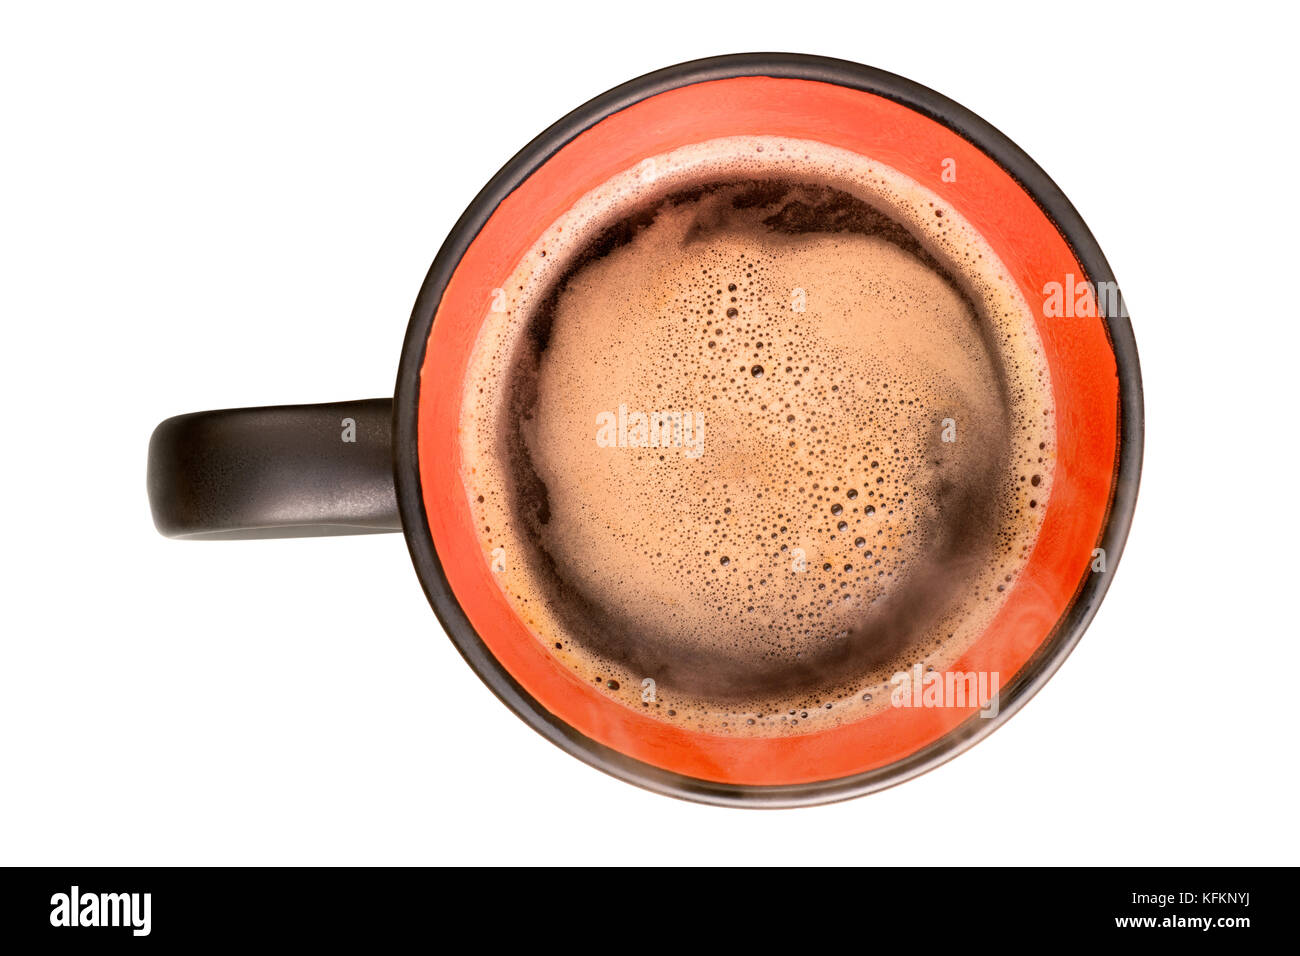 Large coffee cup close up. Top view, isolated on white with clipping path Stock Photo